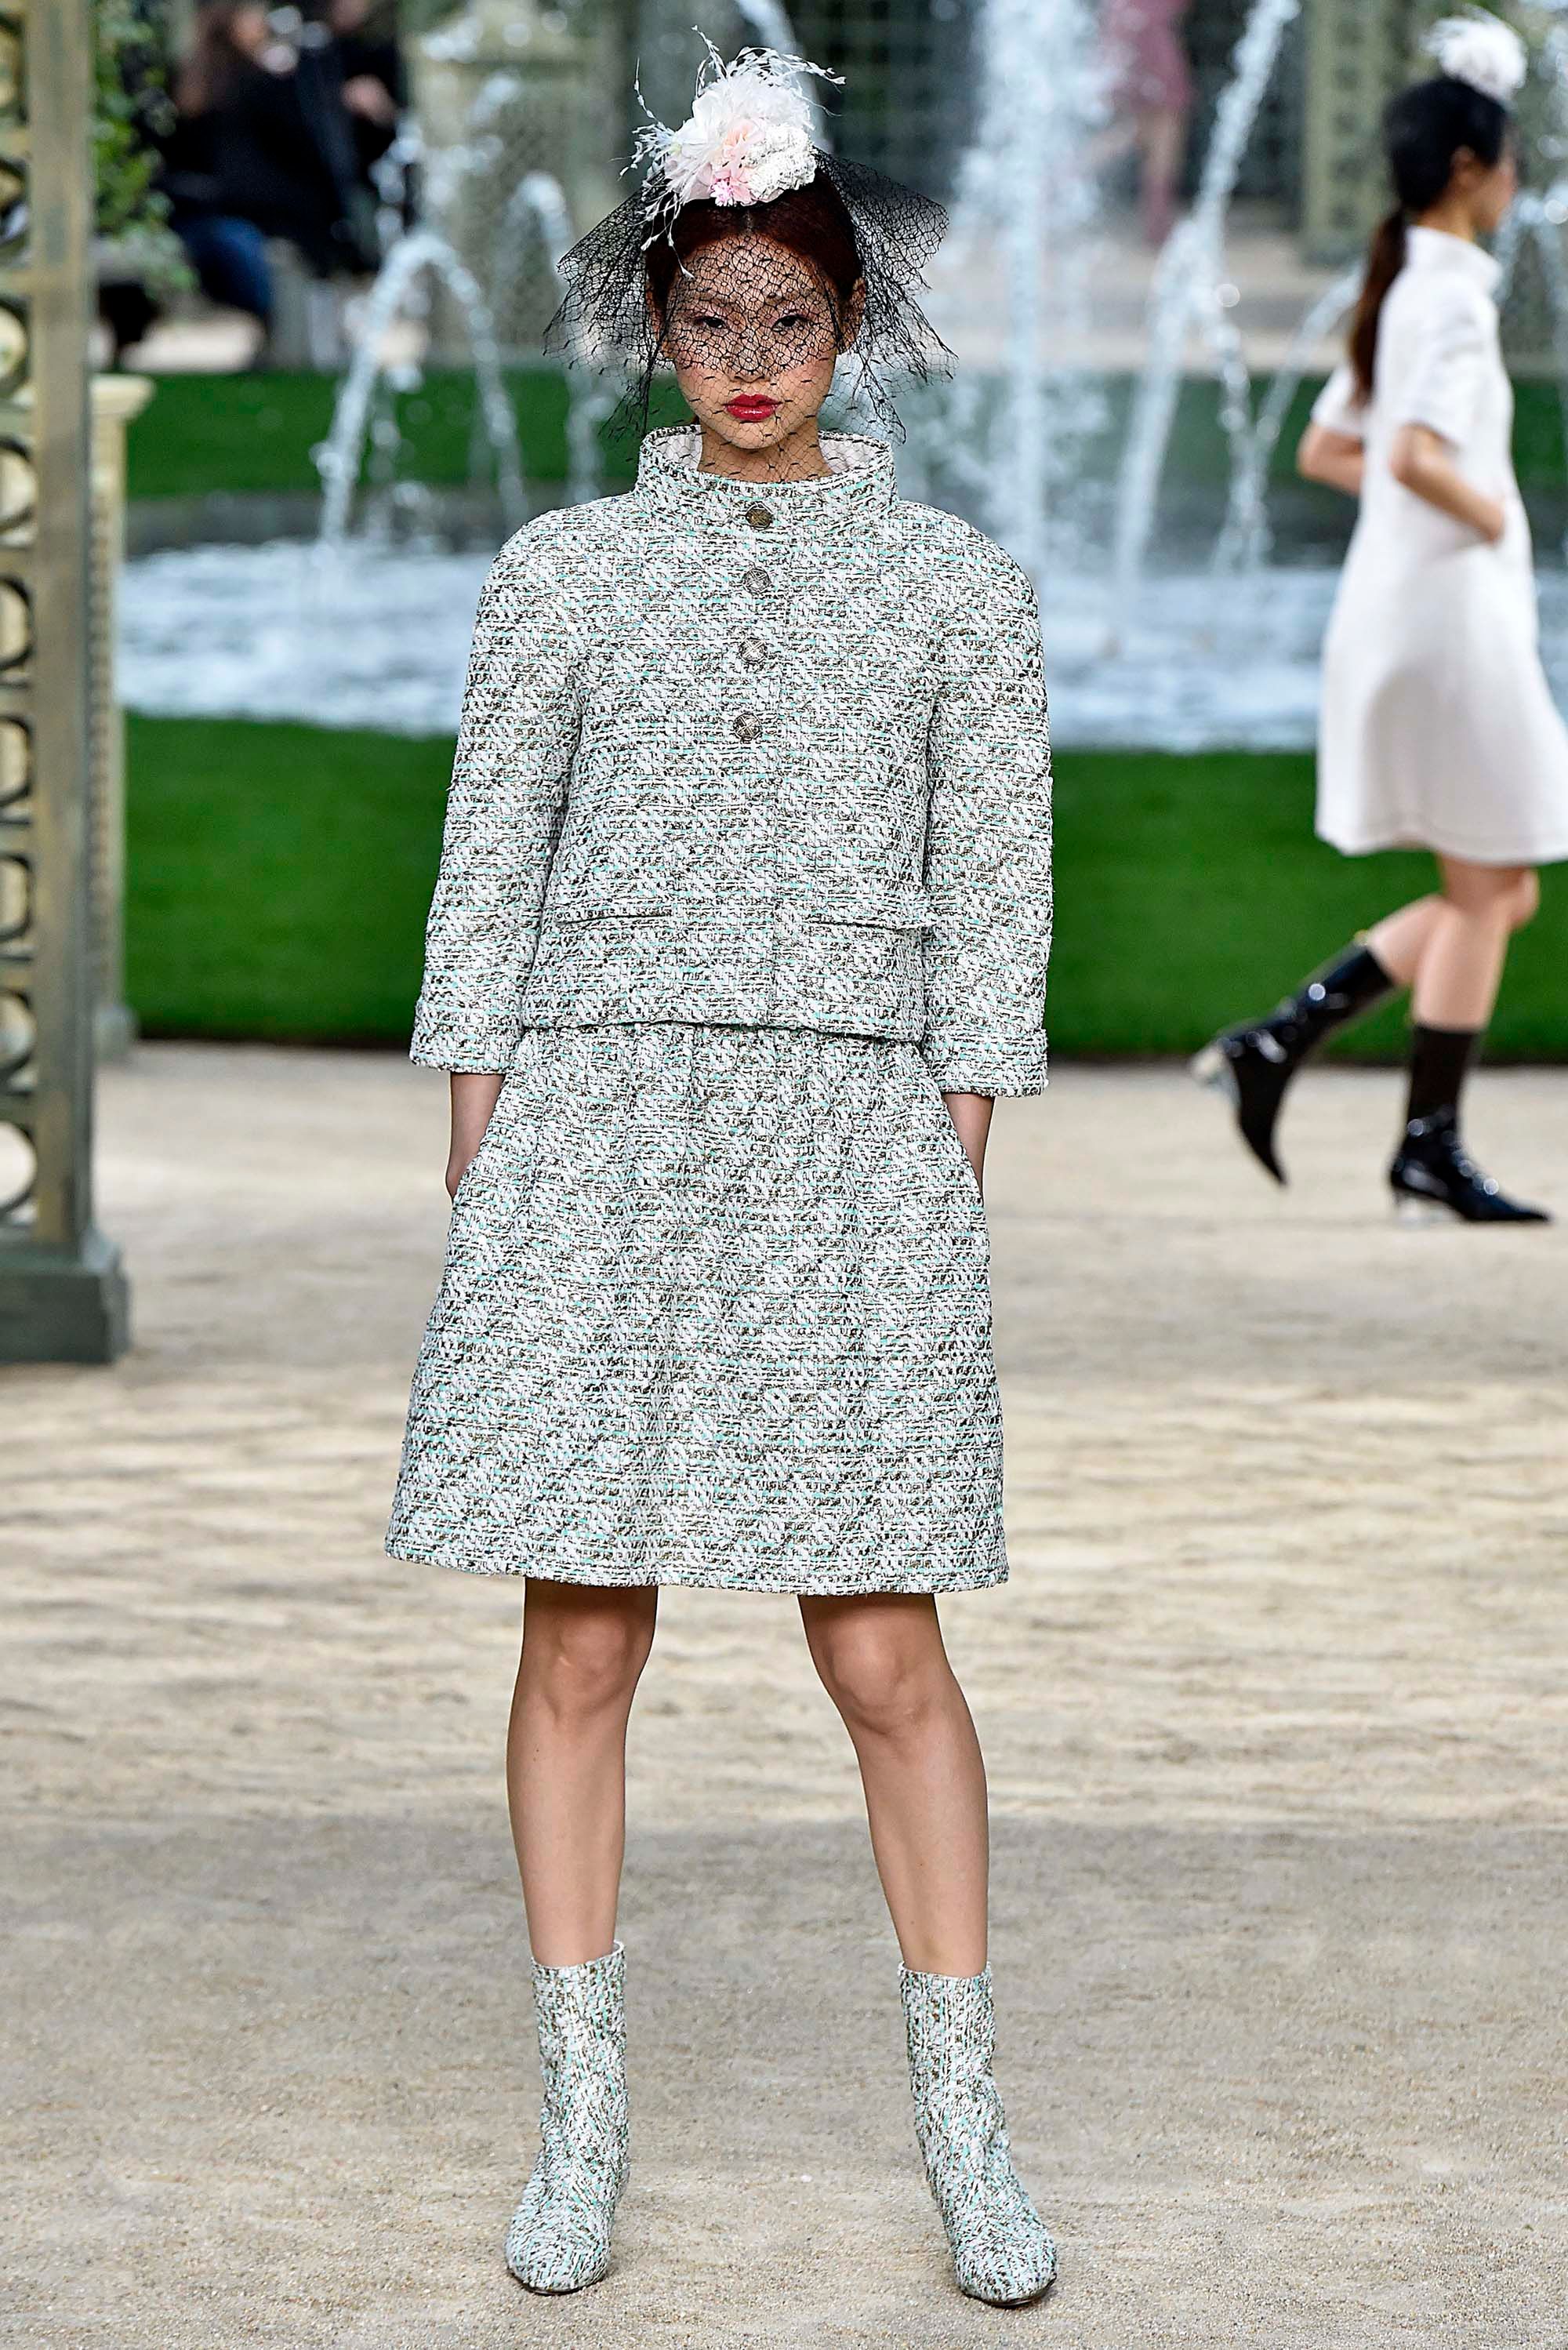 Chanel S/S 18 couture #20 - Tagwalk: The Fashion Search Engine